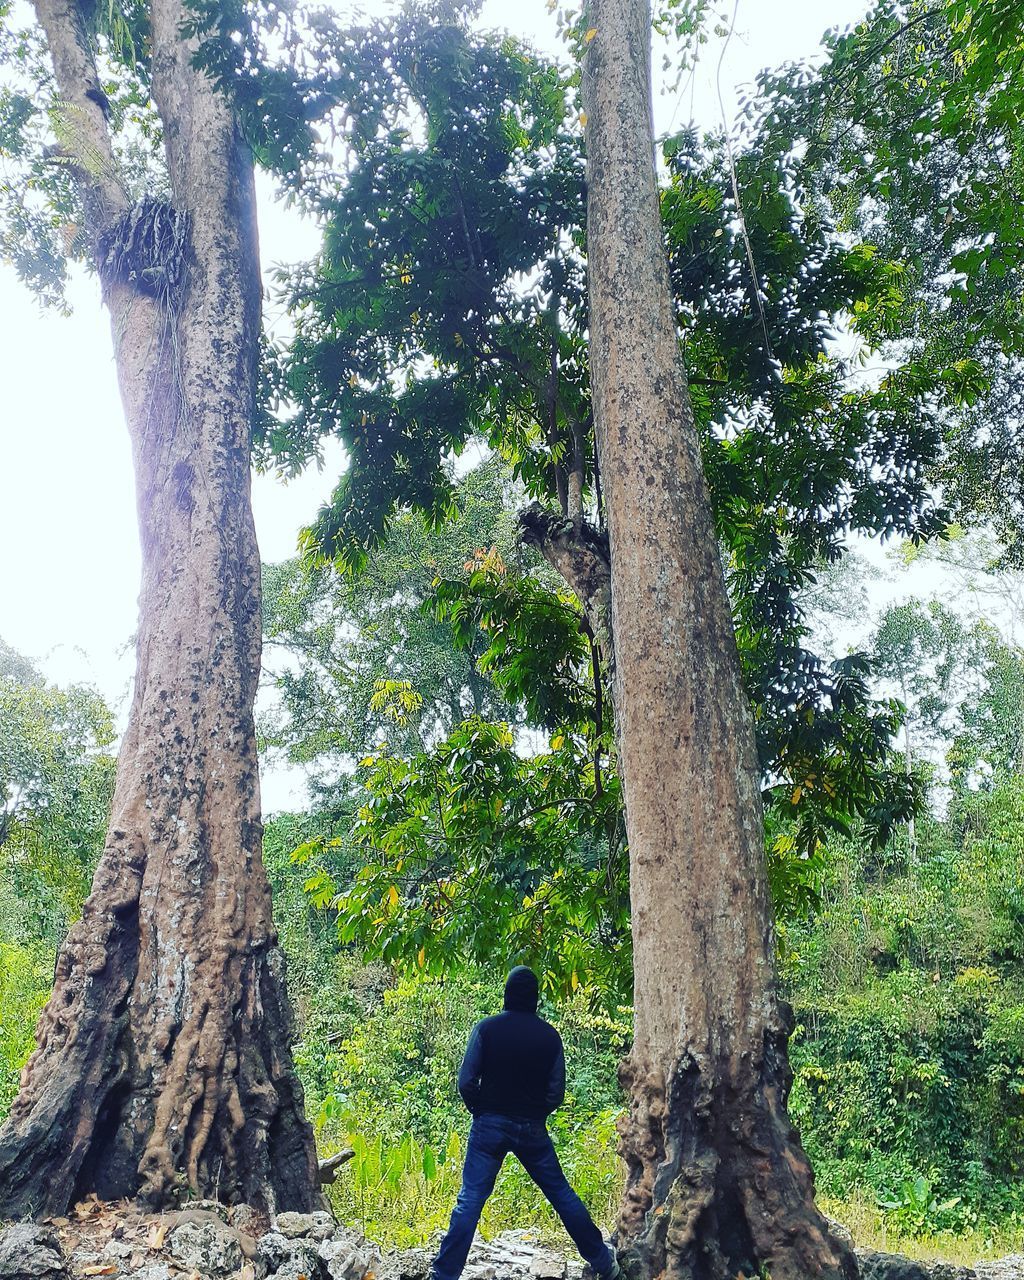 REAR VIEW OF MAN STANDING AMIDST TREES